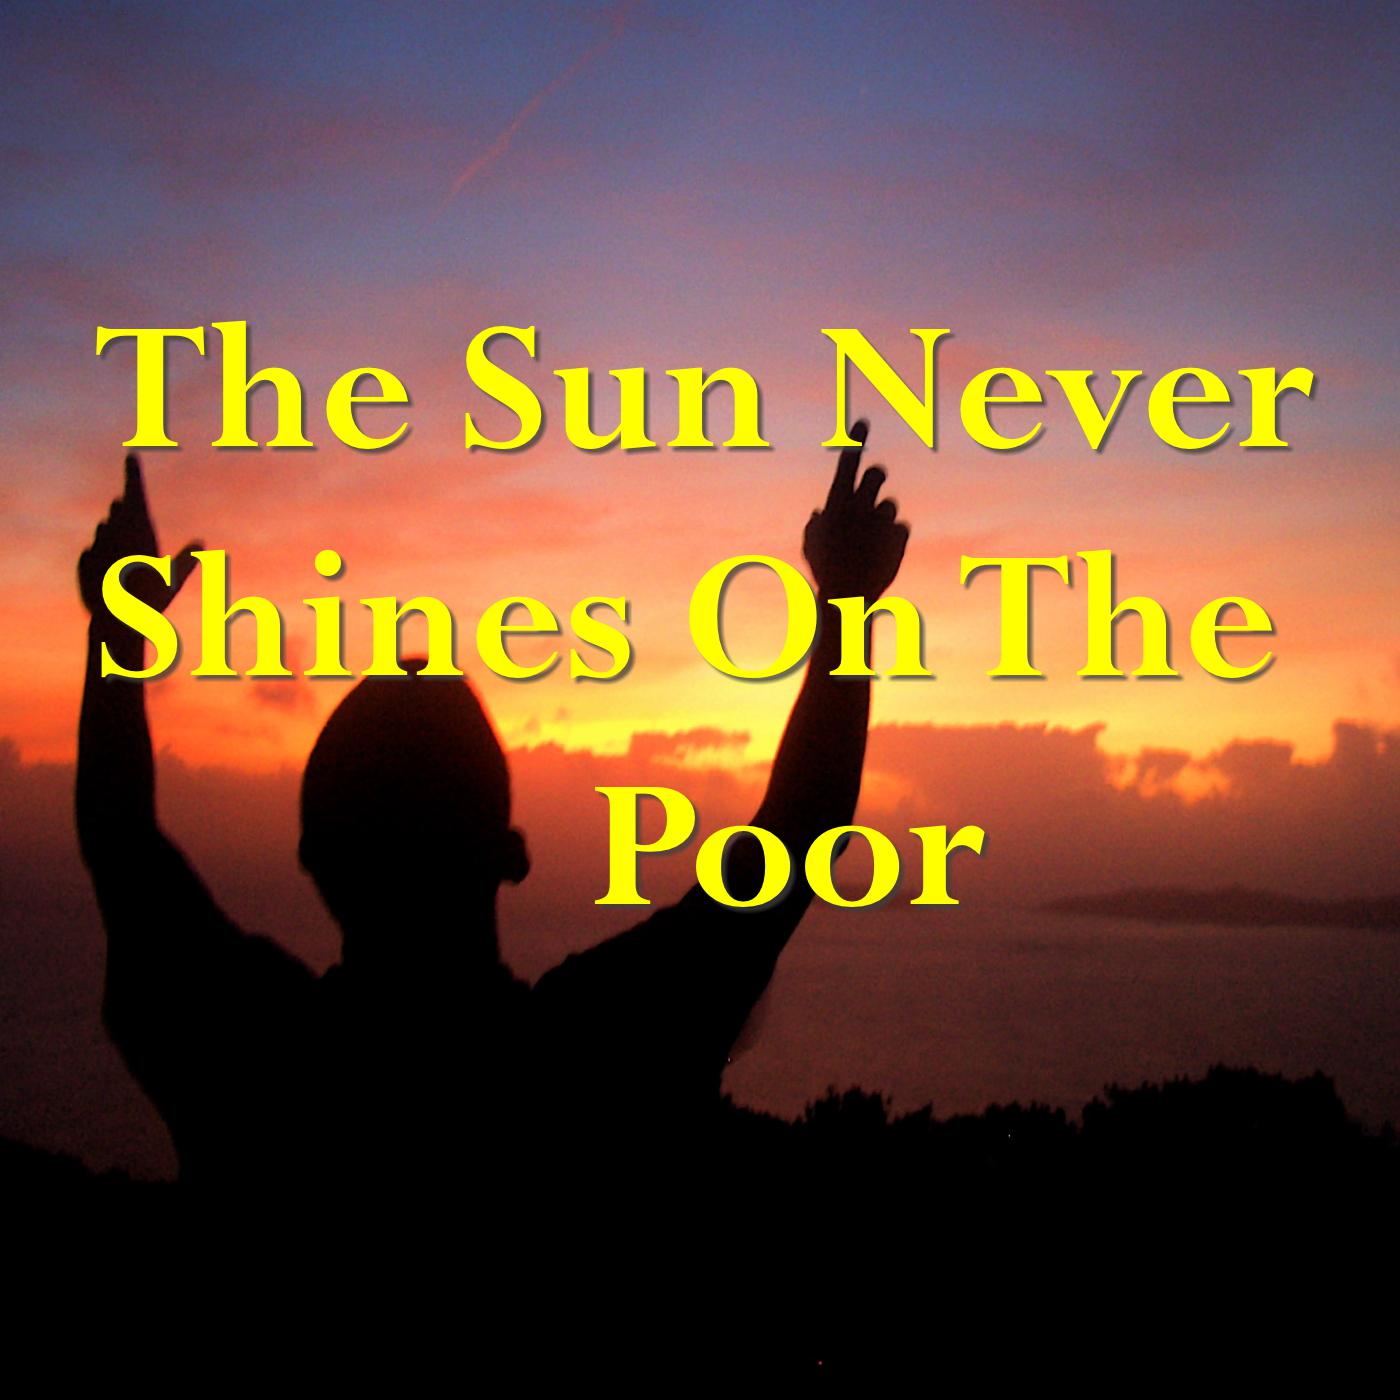 The Sun Never Shines On The Poor